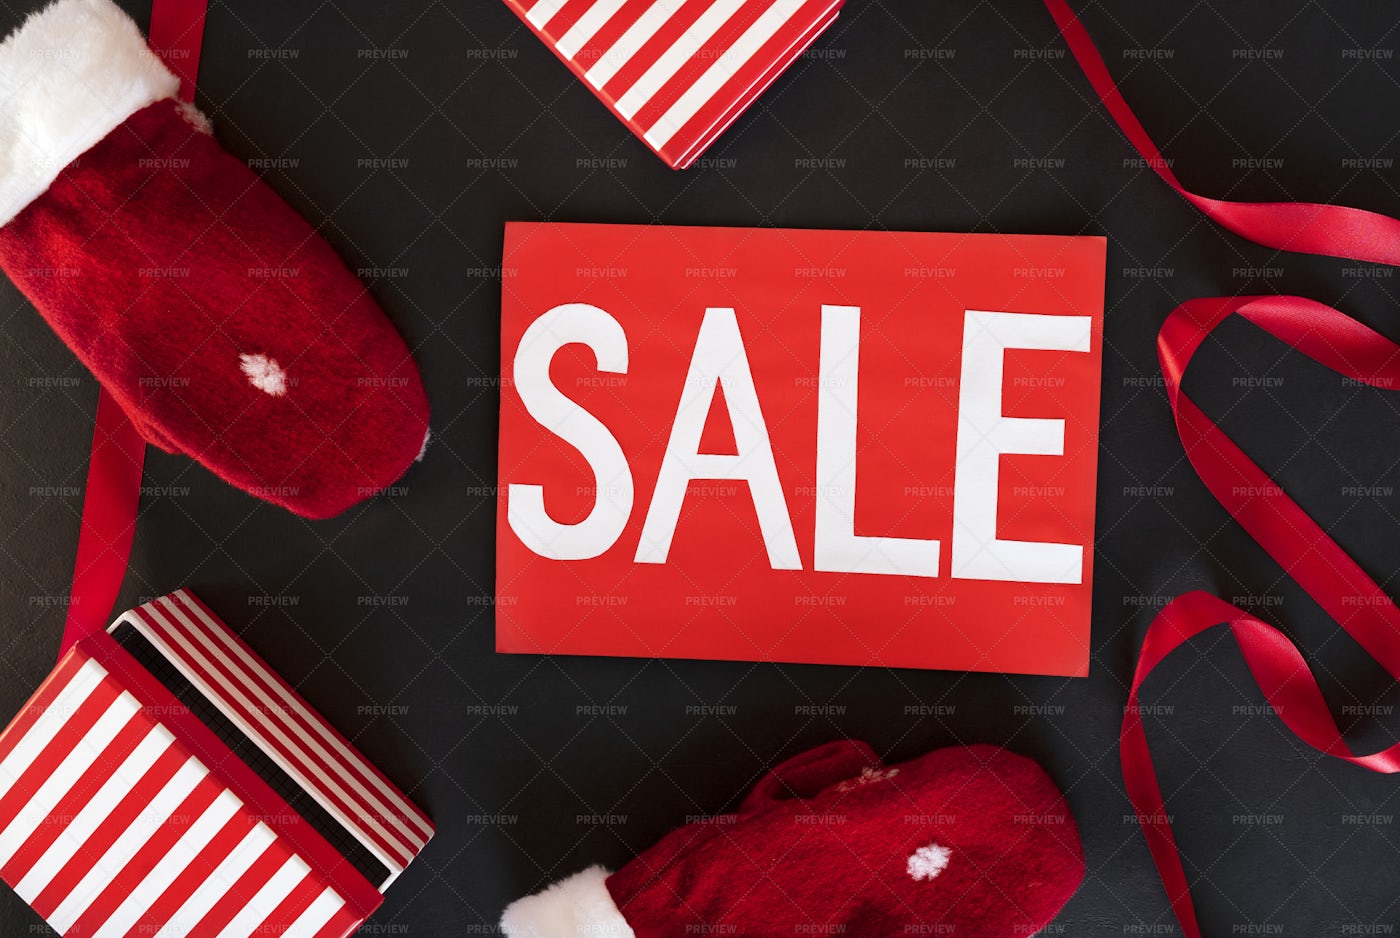 Santa's Red Warm Mittens And Sale Sign: Stock Photos